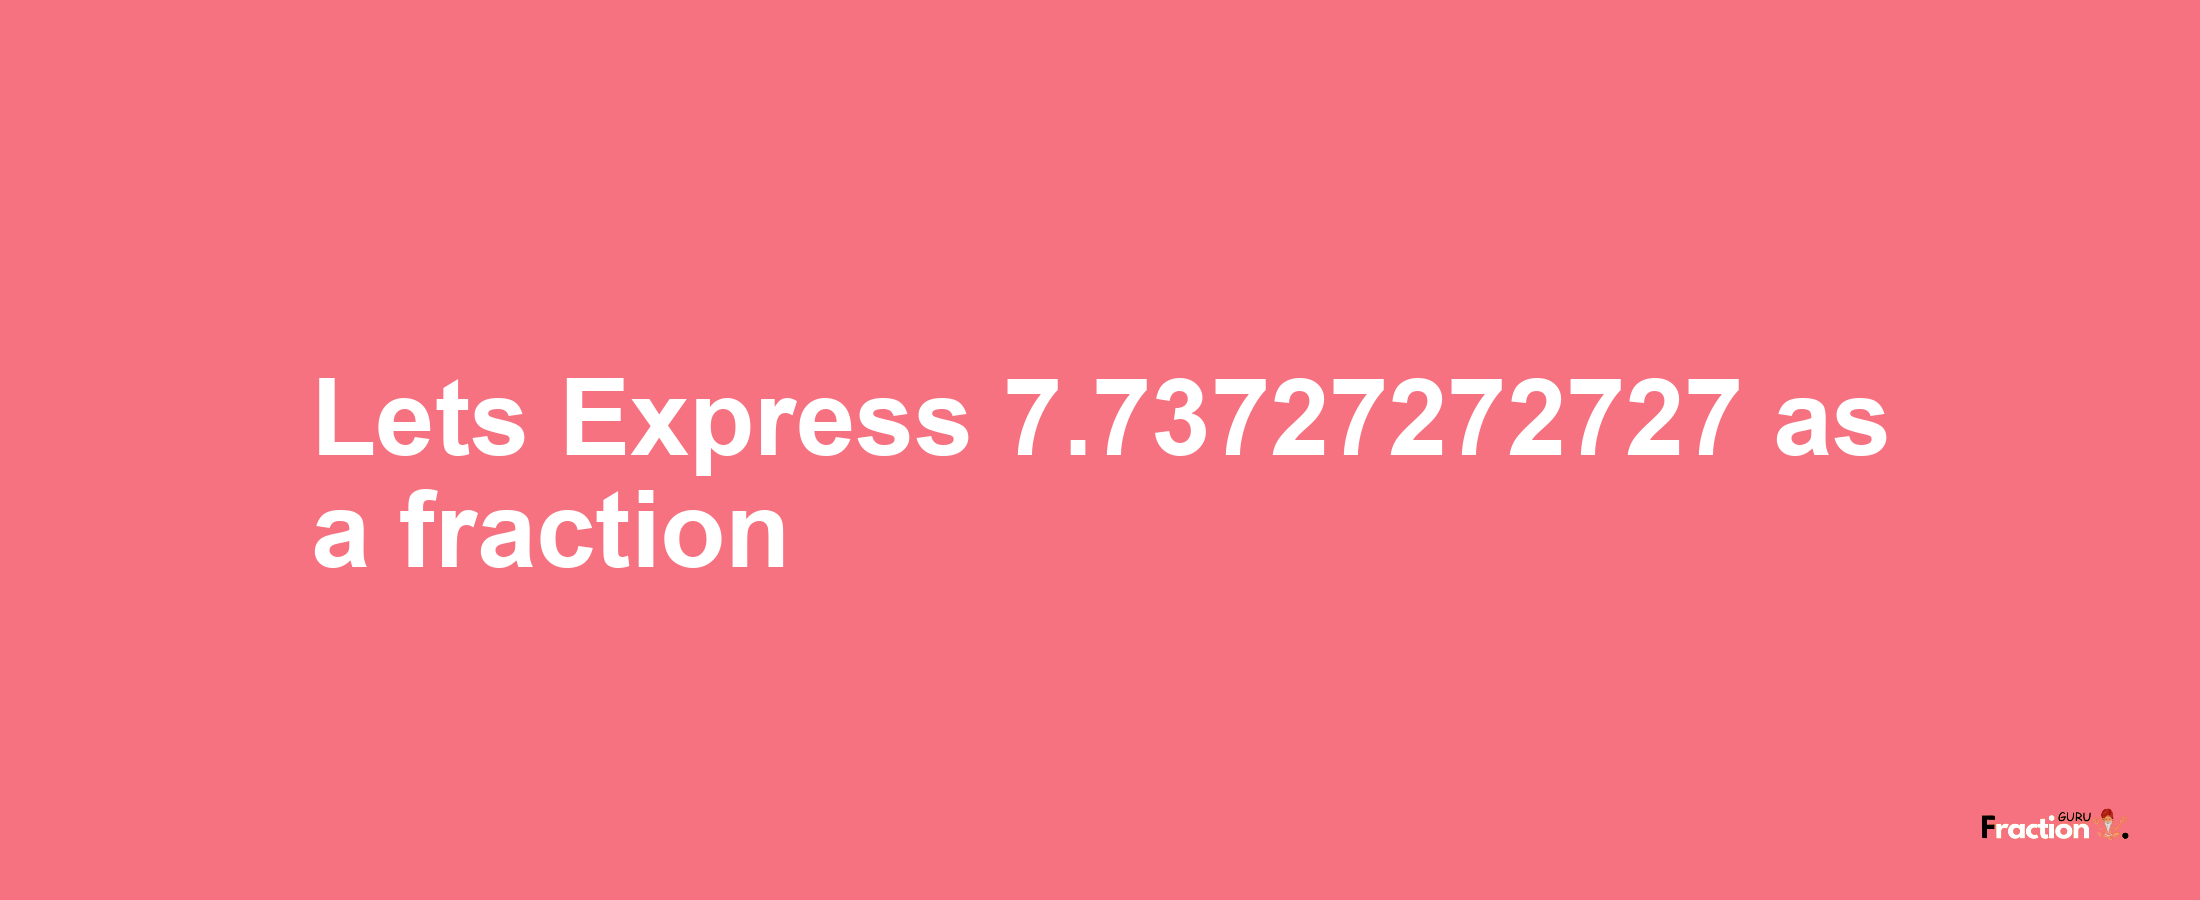 Lets Express 7.73727272727 as afraction